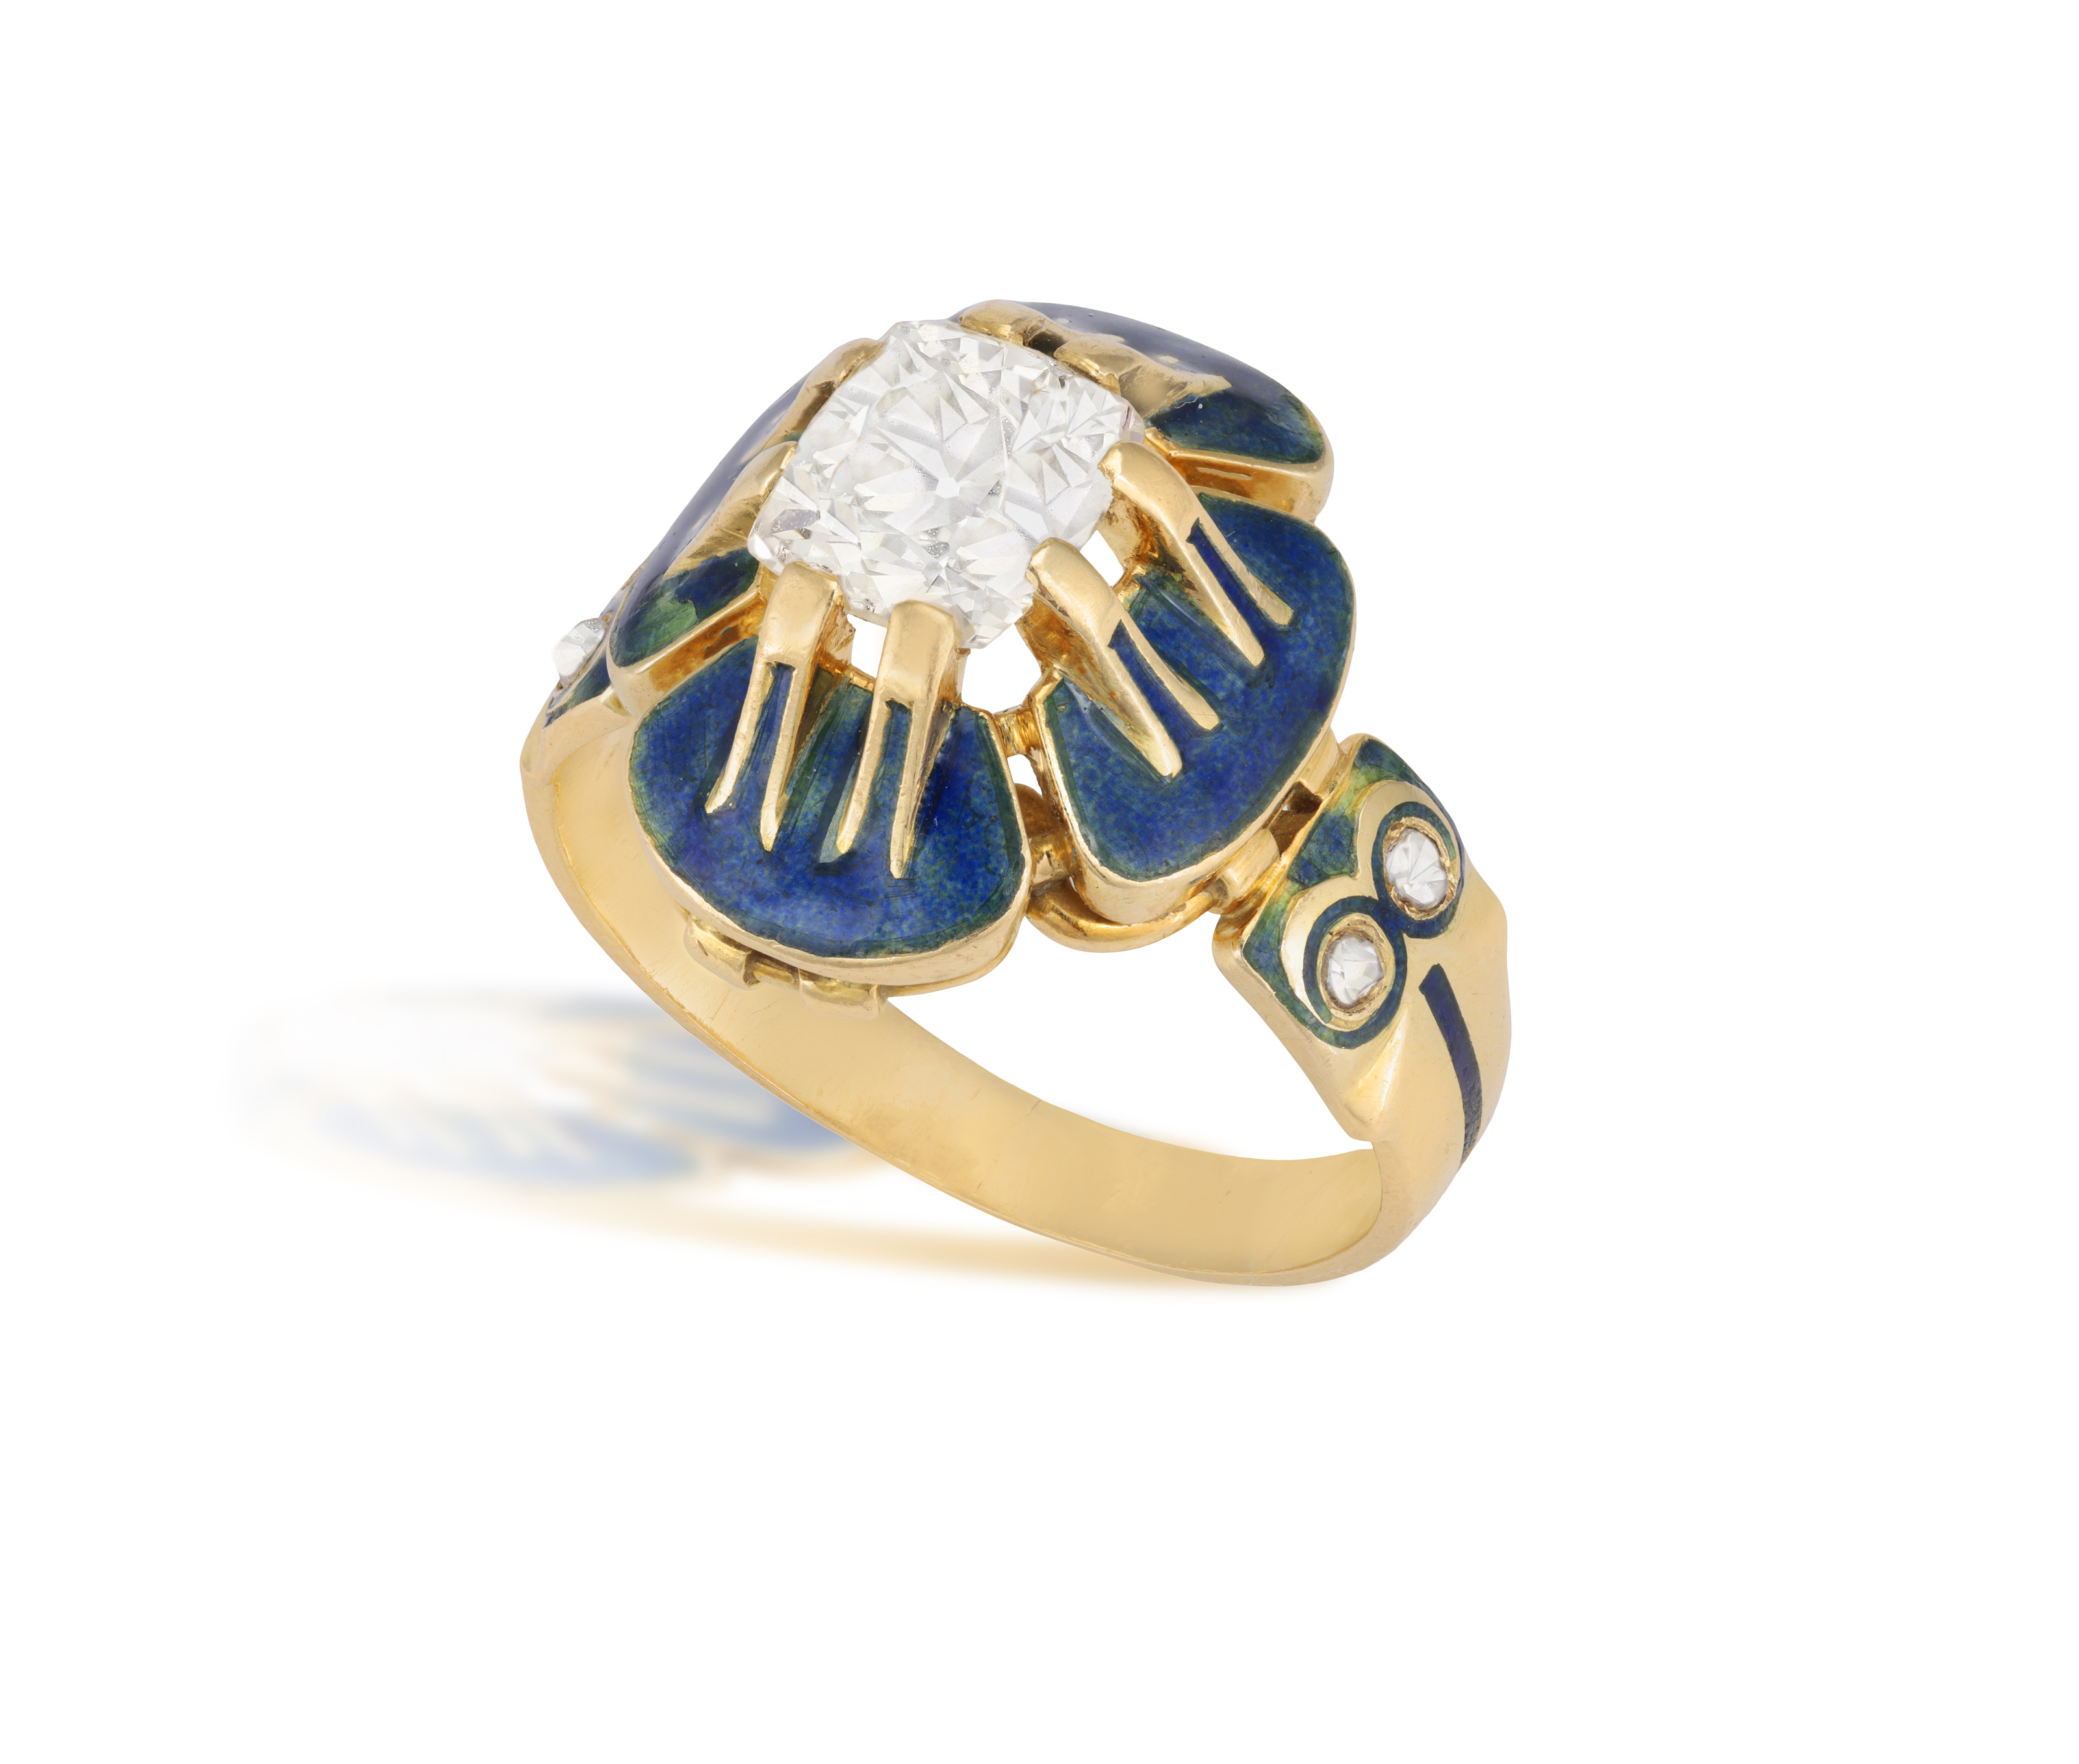 A RARE ART NOUVEAU ENAMEL AND DIAMOND 'PANSY' RING, BY CHARLES RIVAUD, CIRCA 1900 The cushion-shaped - Image 2 of 6